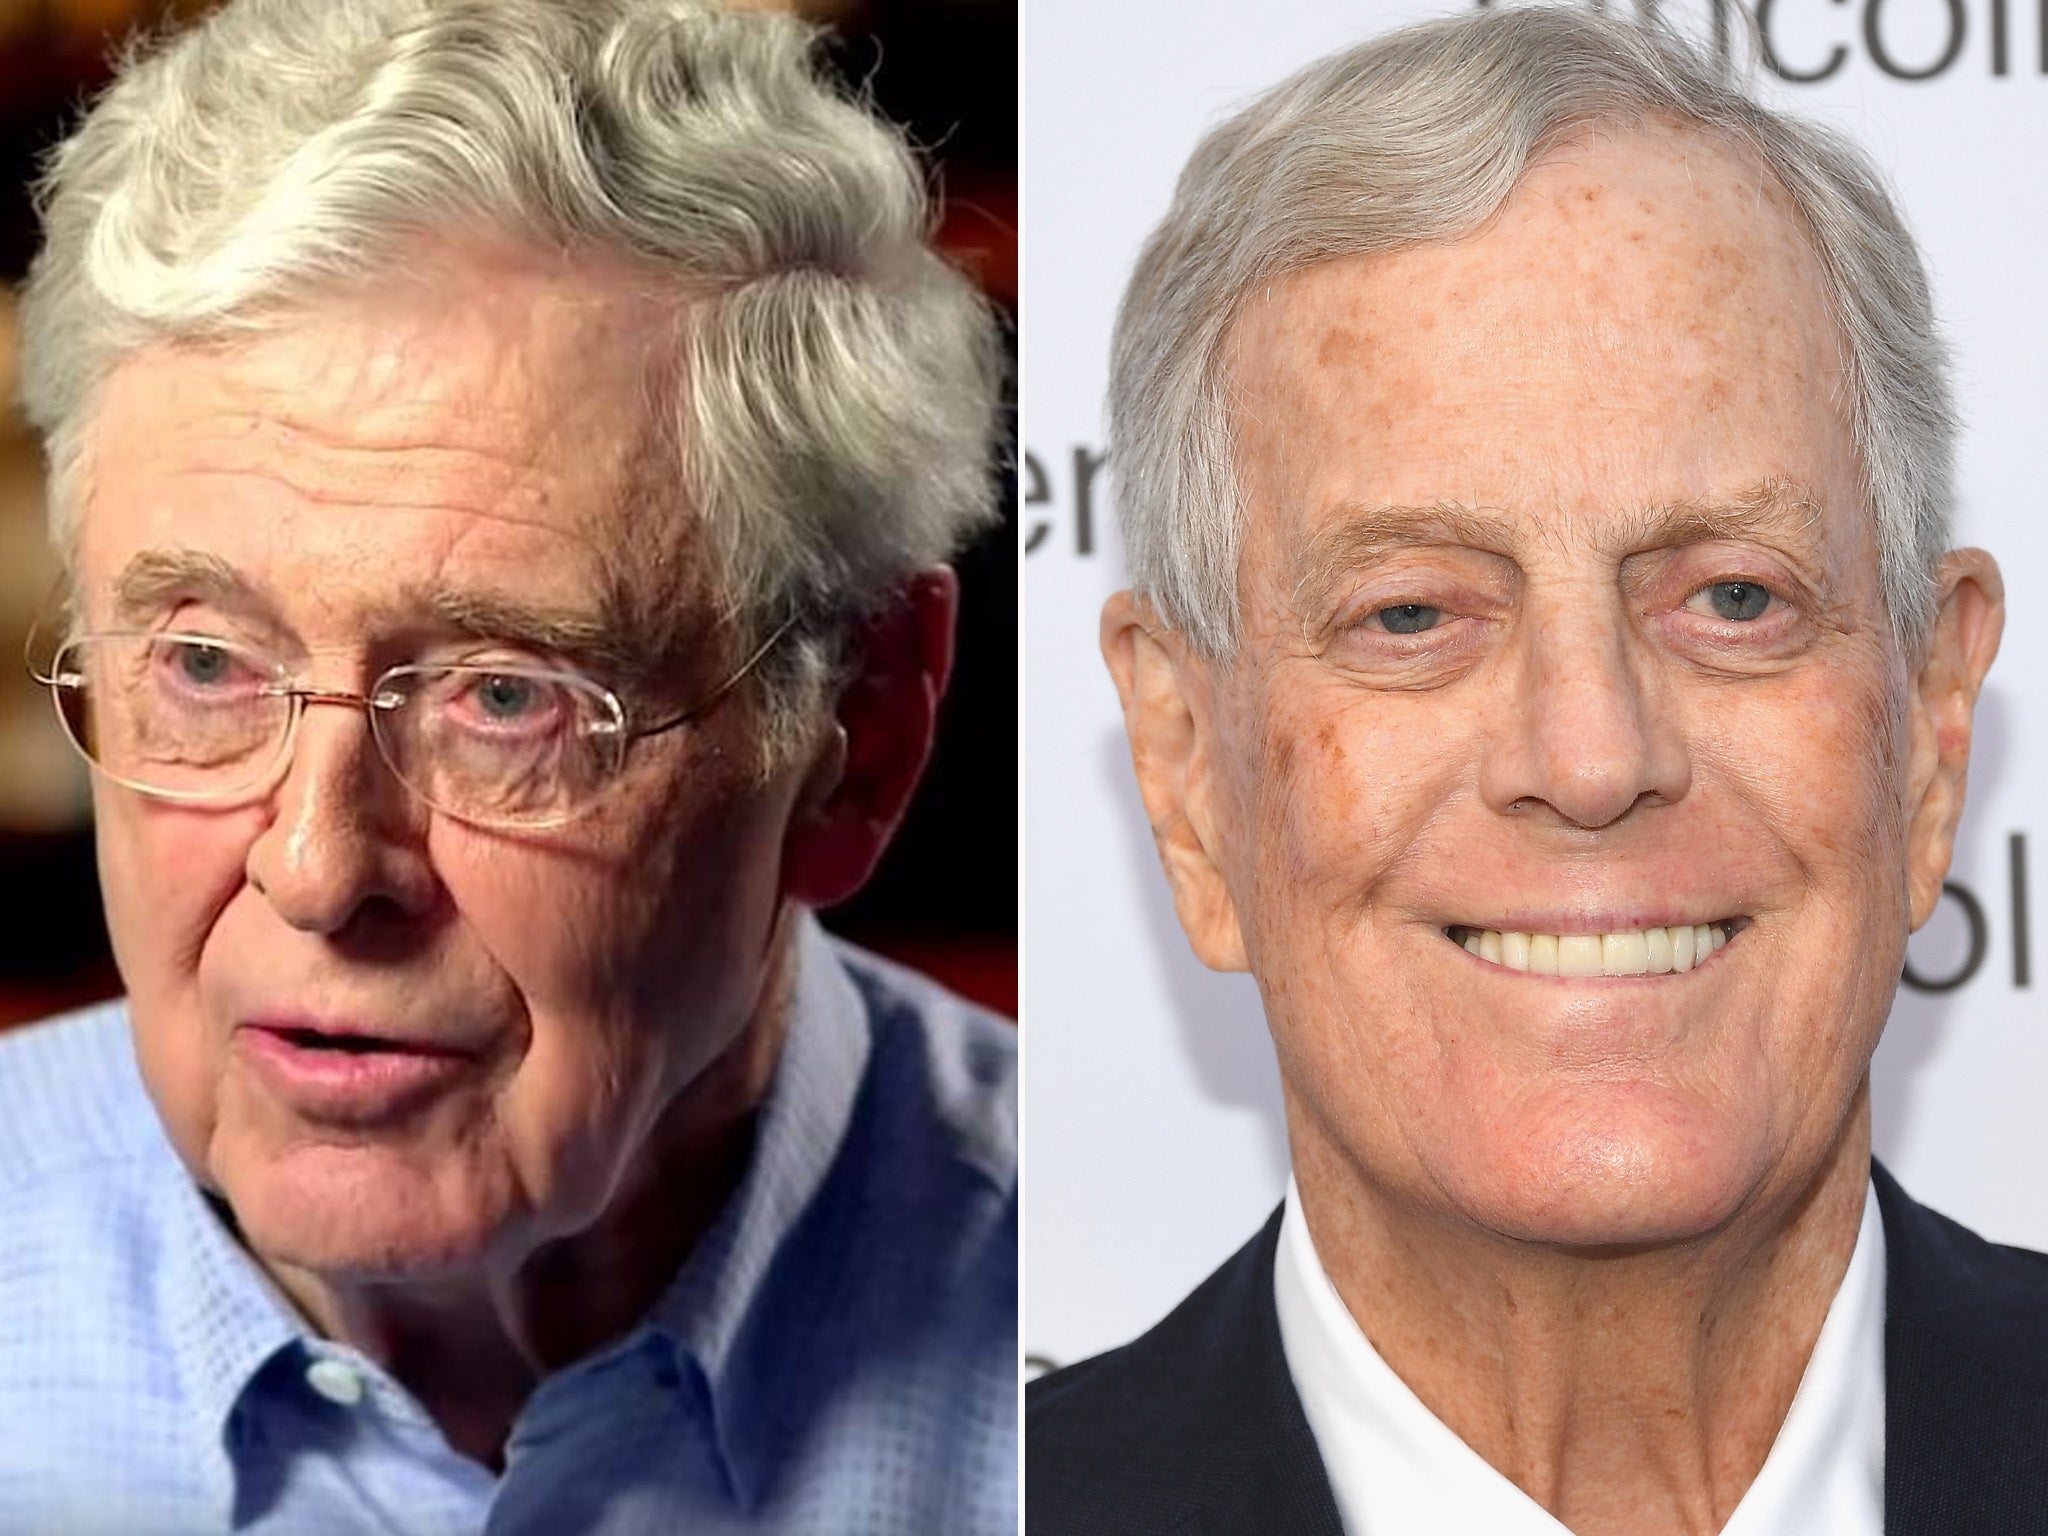 The Koch network is one of the most powerful conservative groups in the US